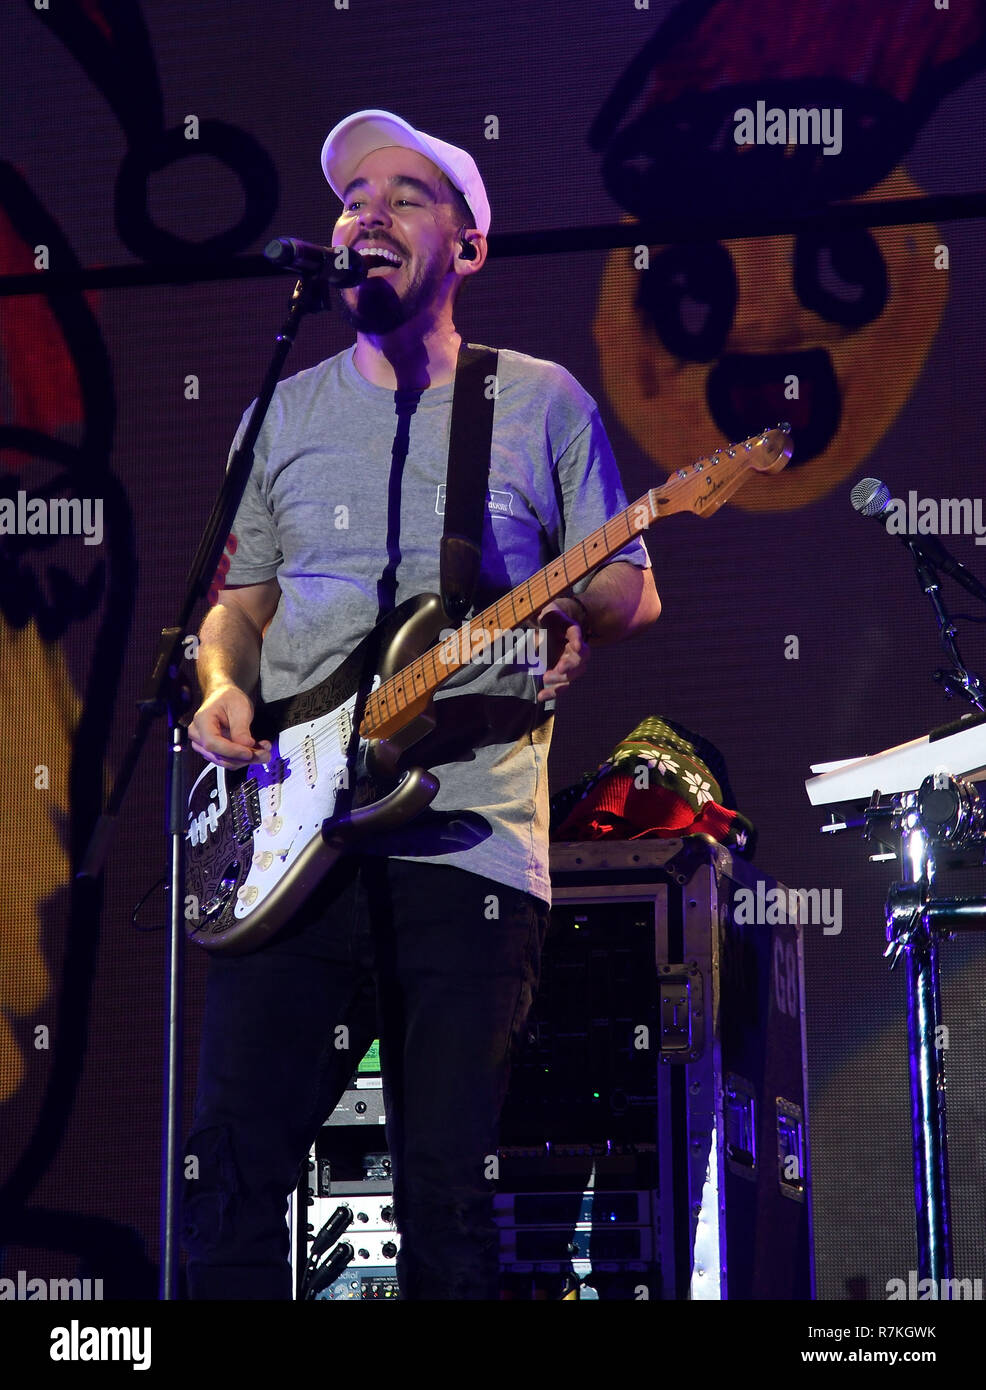 INGLEWOOD, CA - DECEMBER 09: Mike Shinoda performs onstage during KROQ Absolut Almost Acoustic Christmas 2018 at The Forum on December 9, 2018 in Inglewood, California. Photo: imageSPACE/MediaPunch Stock Photo